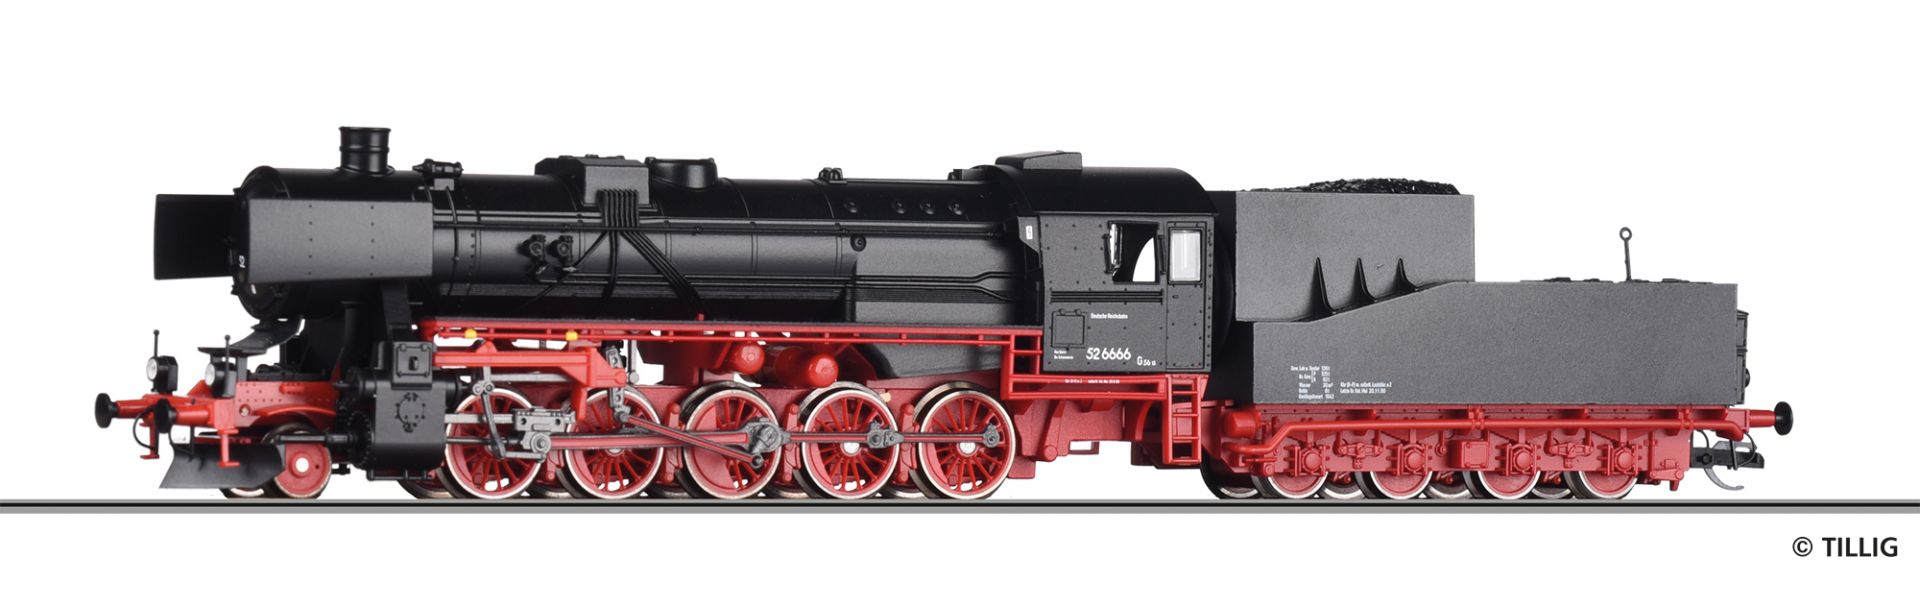 502391 | Steam locomotive Museum -sold out-